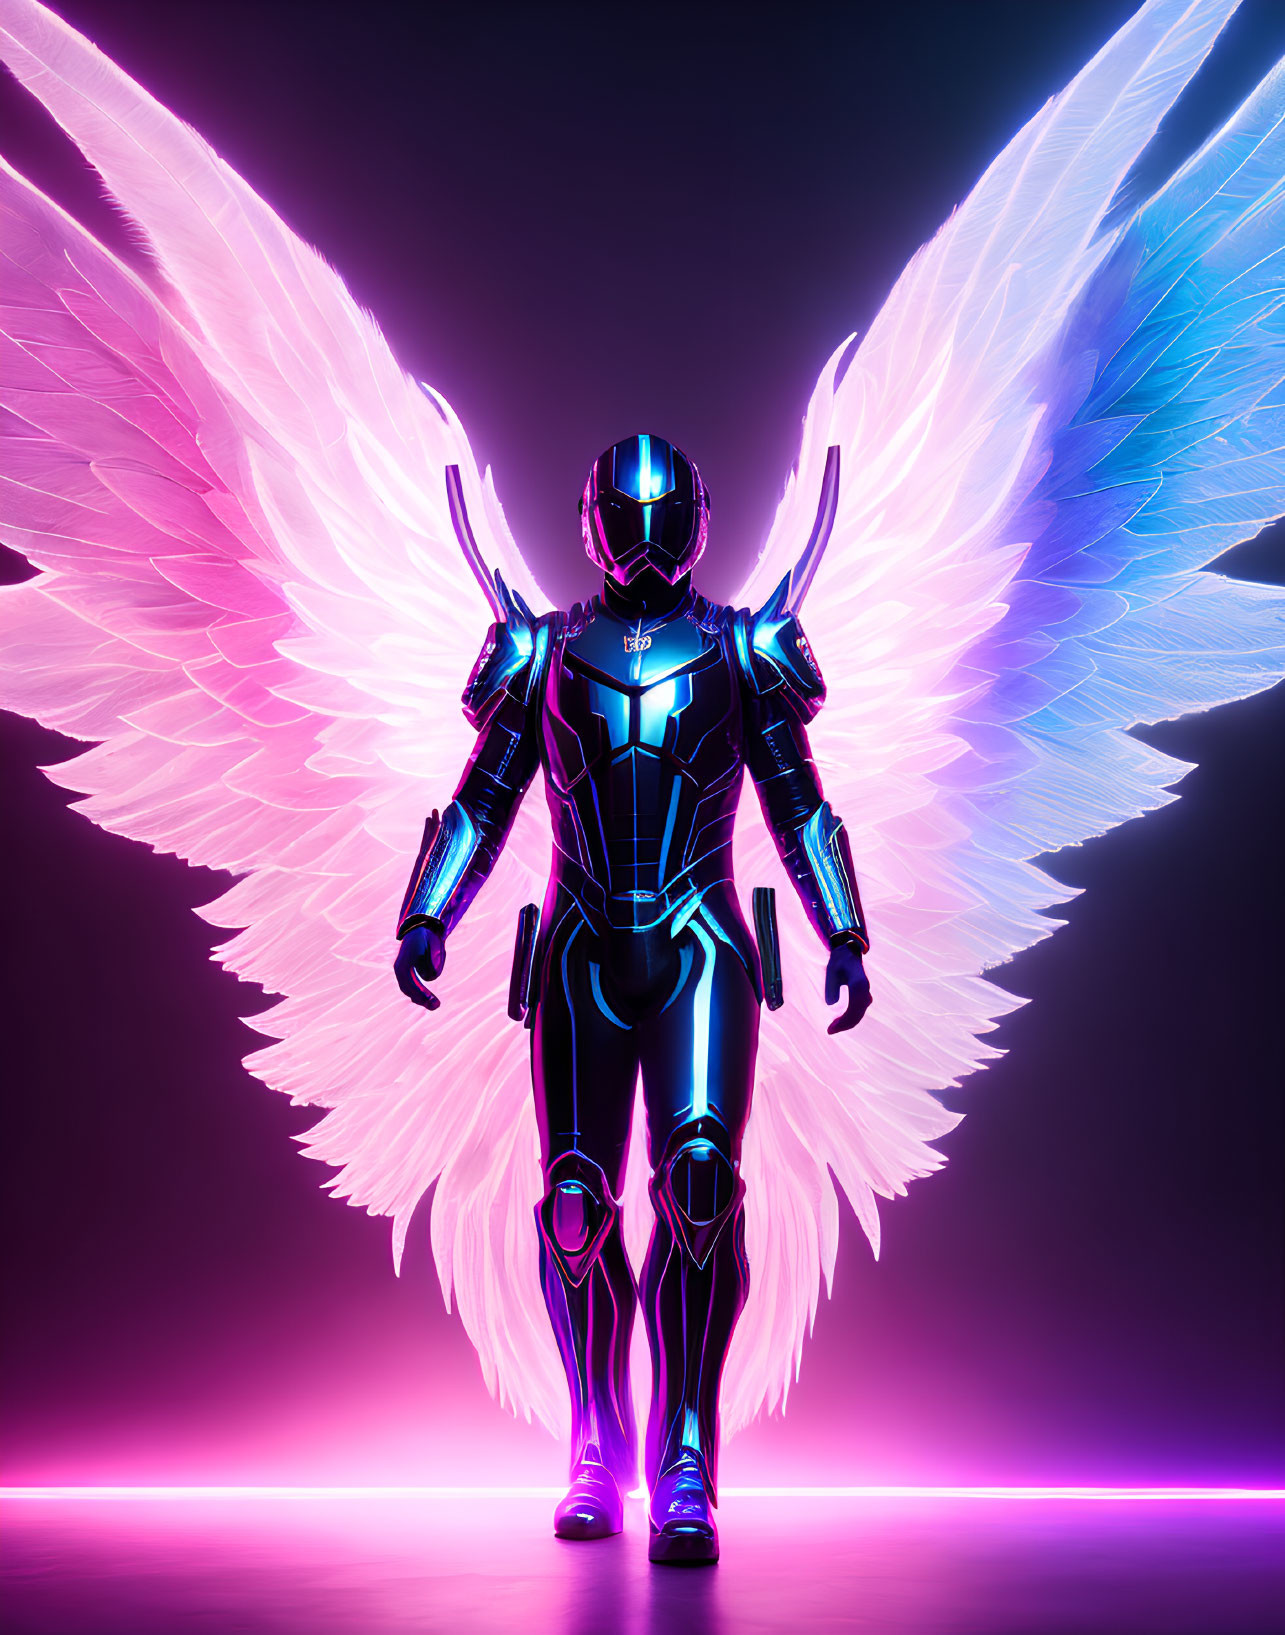 Armored figure with glowing accents and luminous wings on vibrant purple background